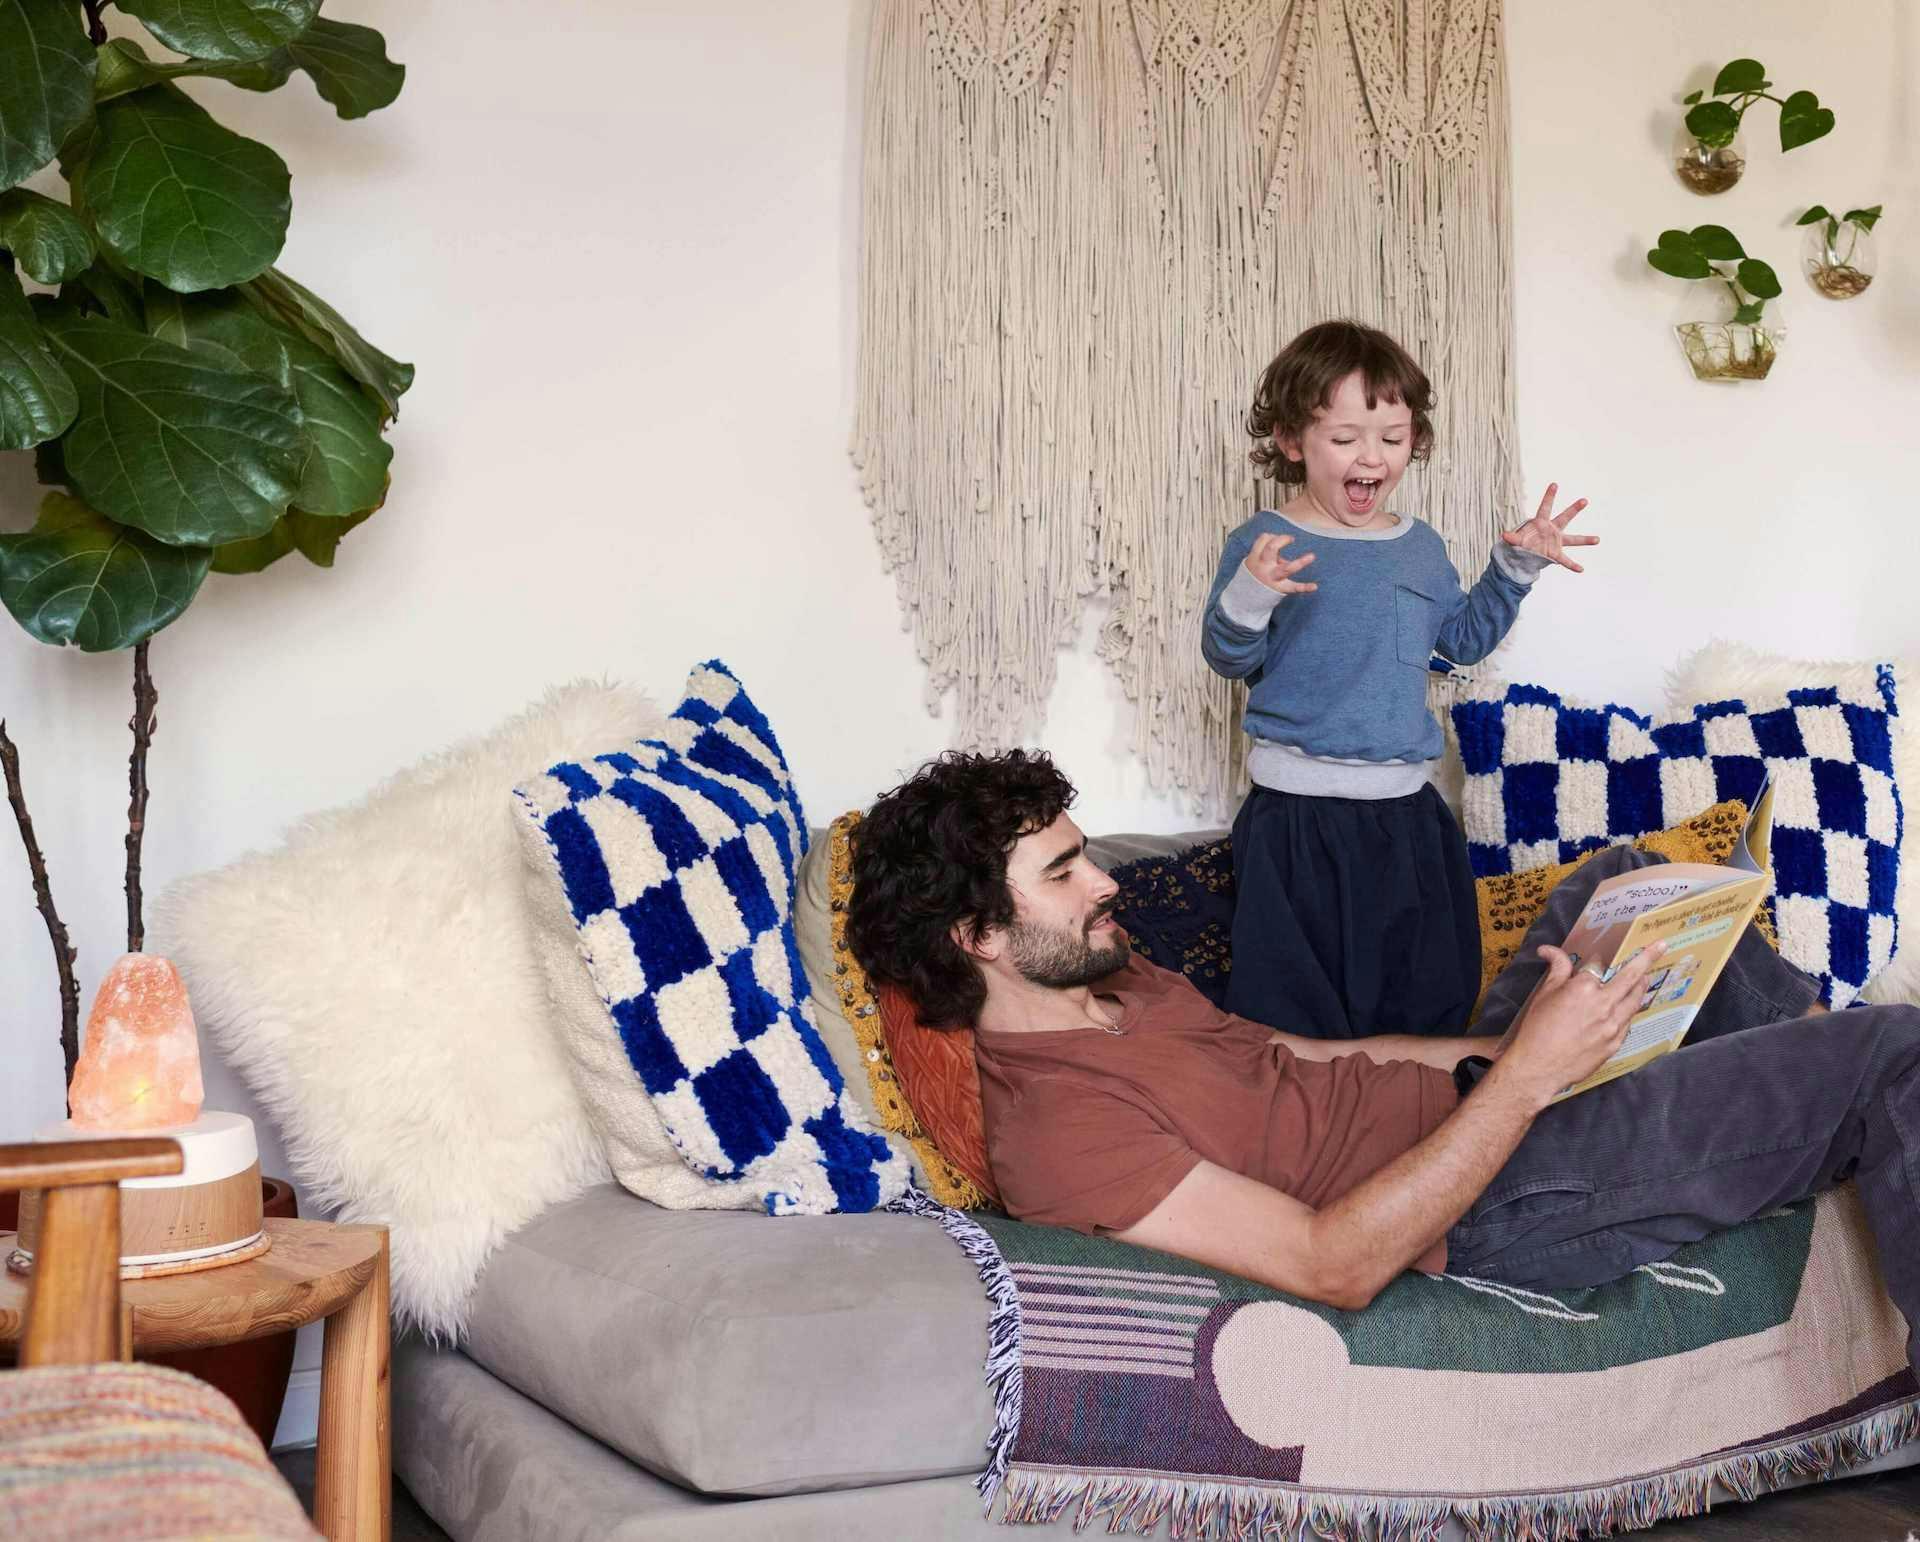 Man reclines on a couch while reading to his son who gestures in excitement